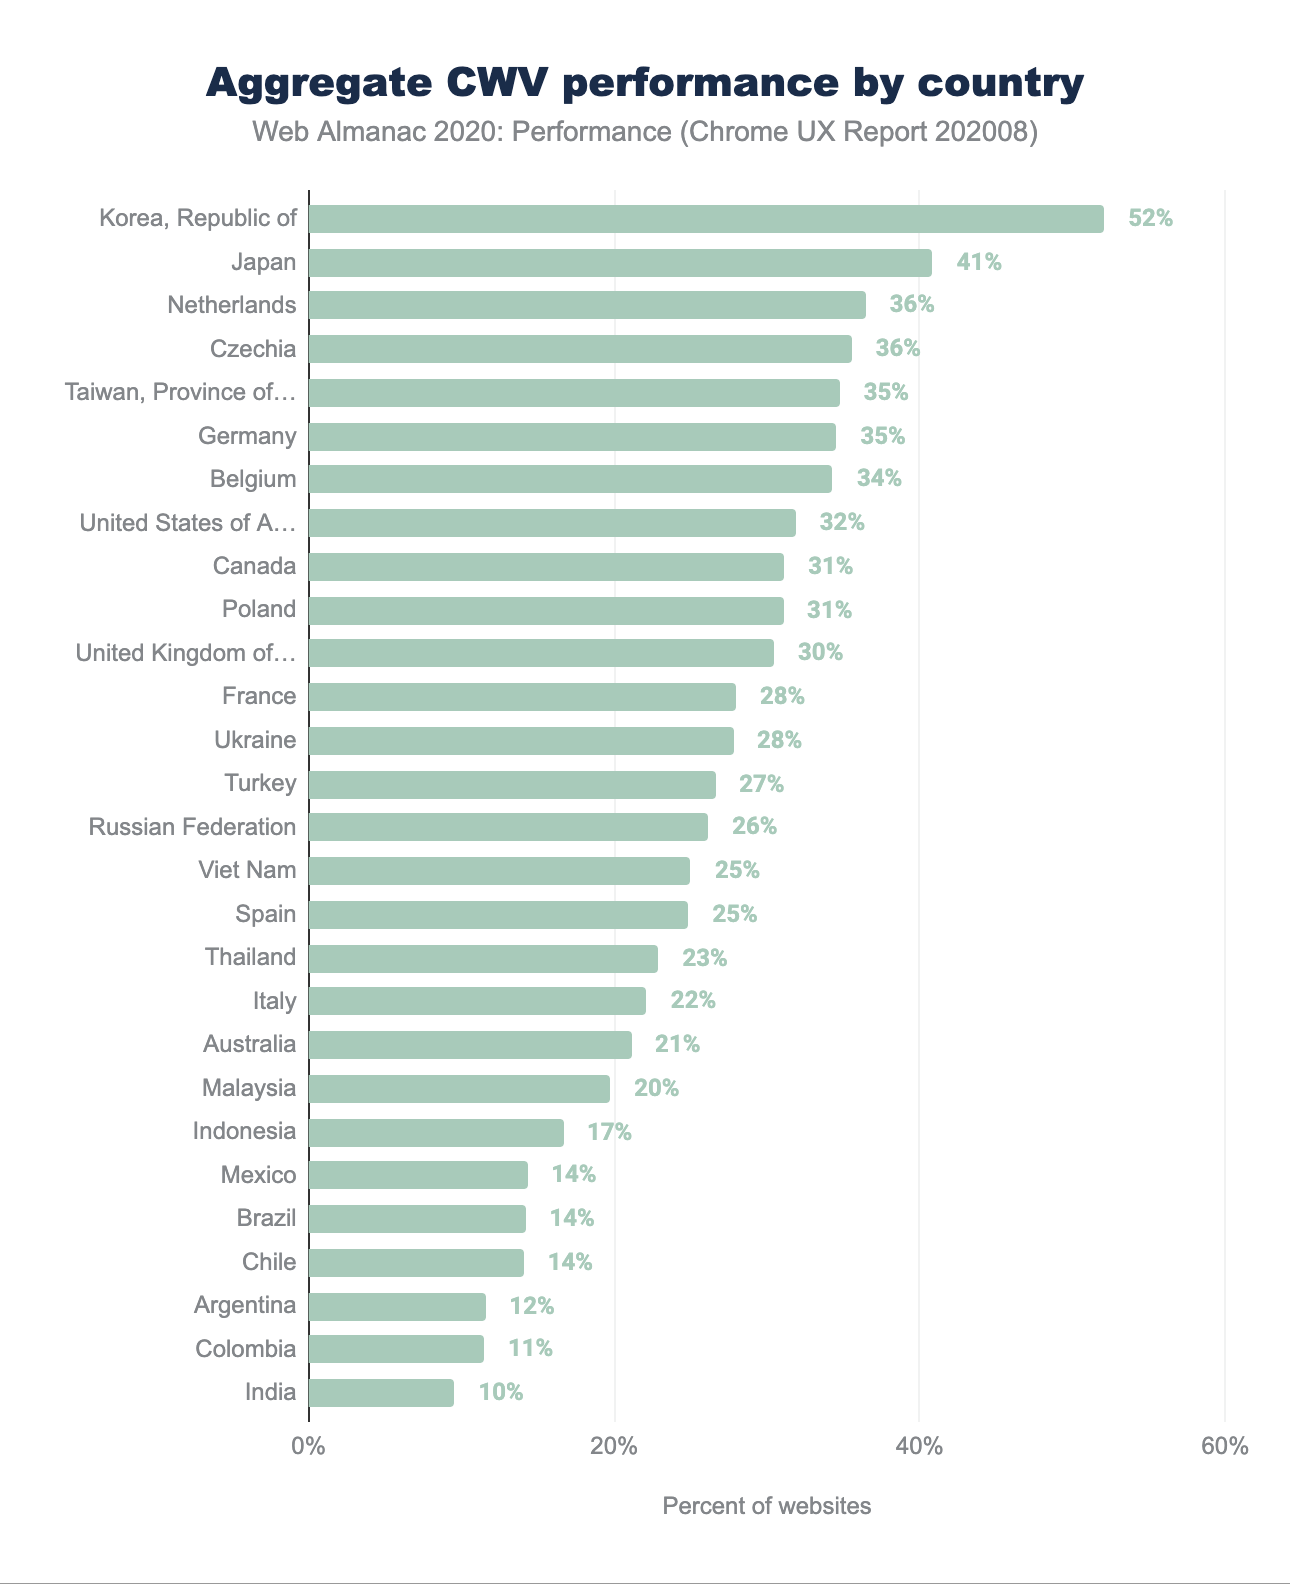 Percent of websites passing the Core Web Vitals assessment per country.